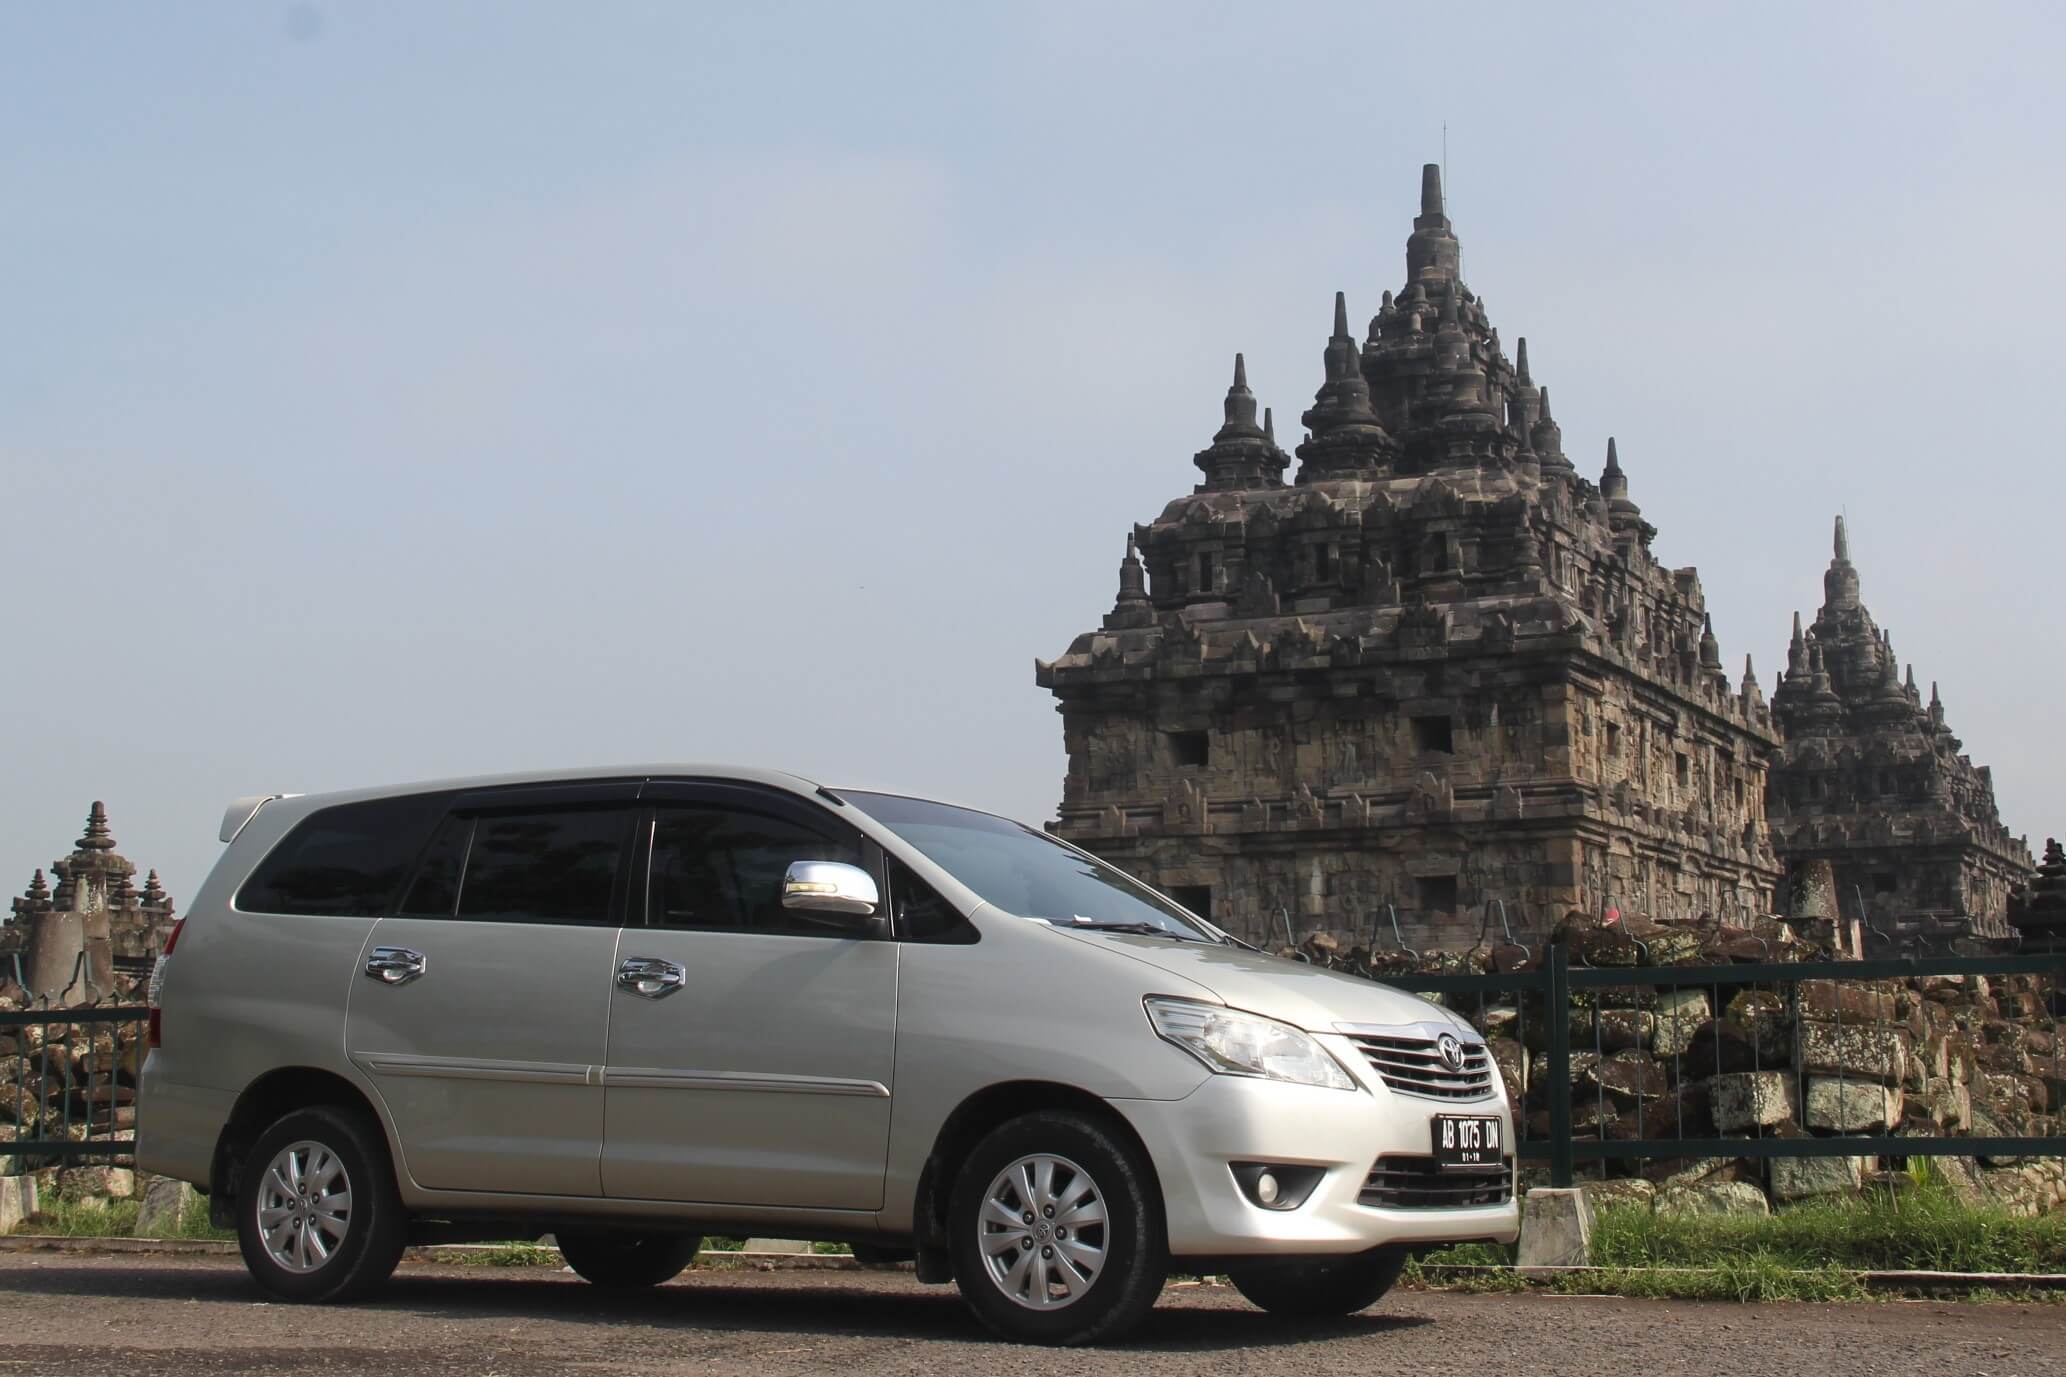 car Hire to discover Jogjakarta